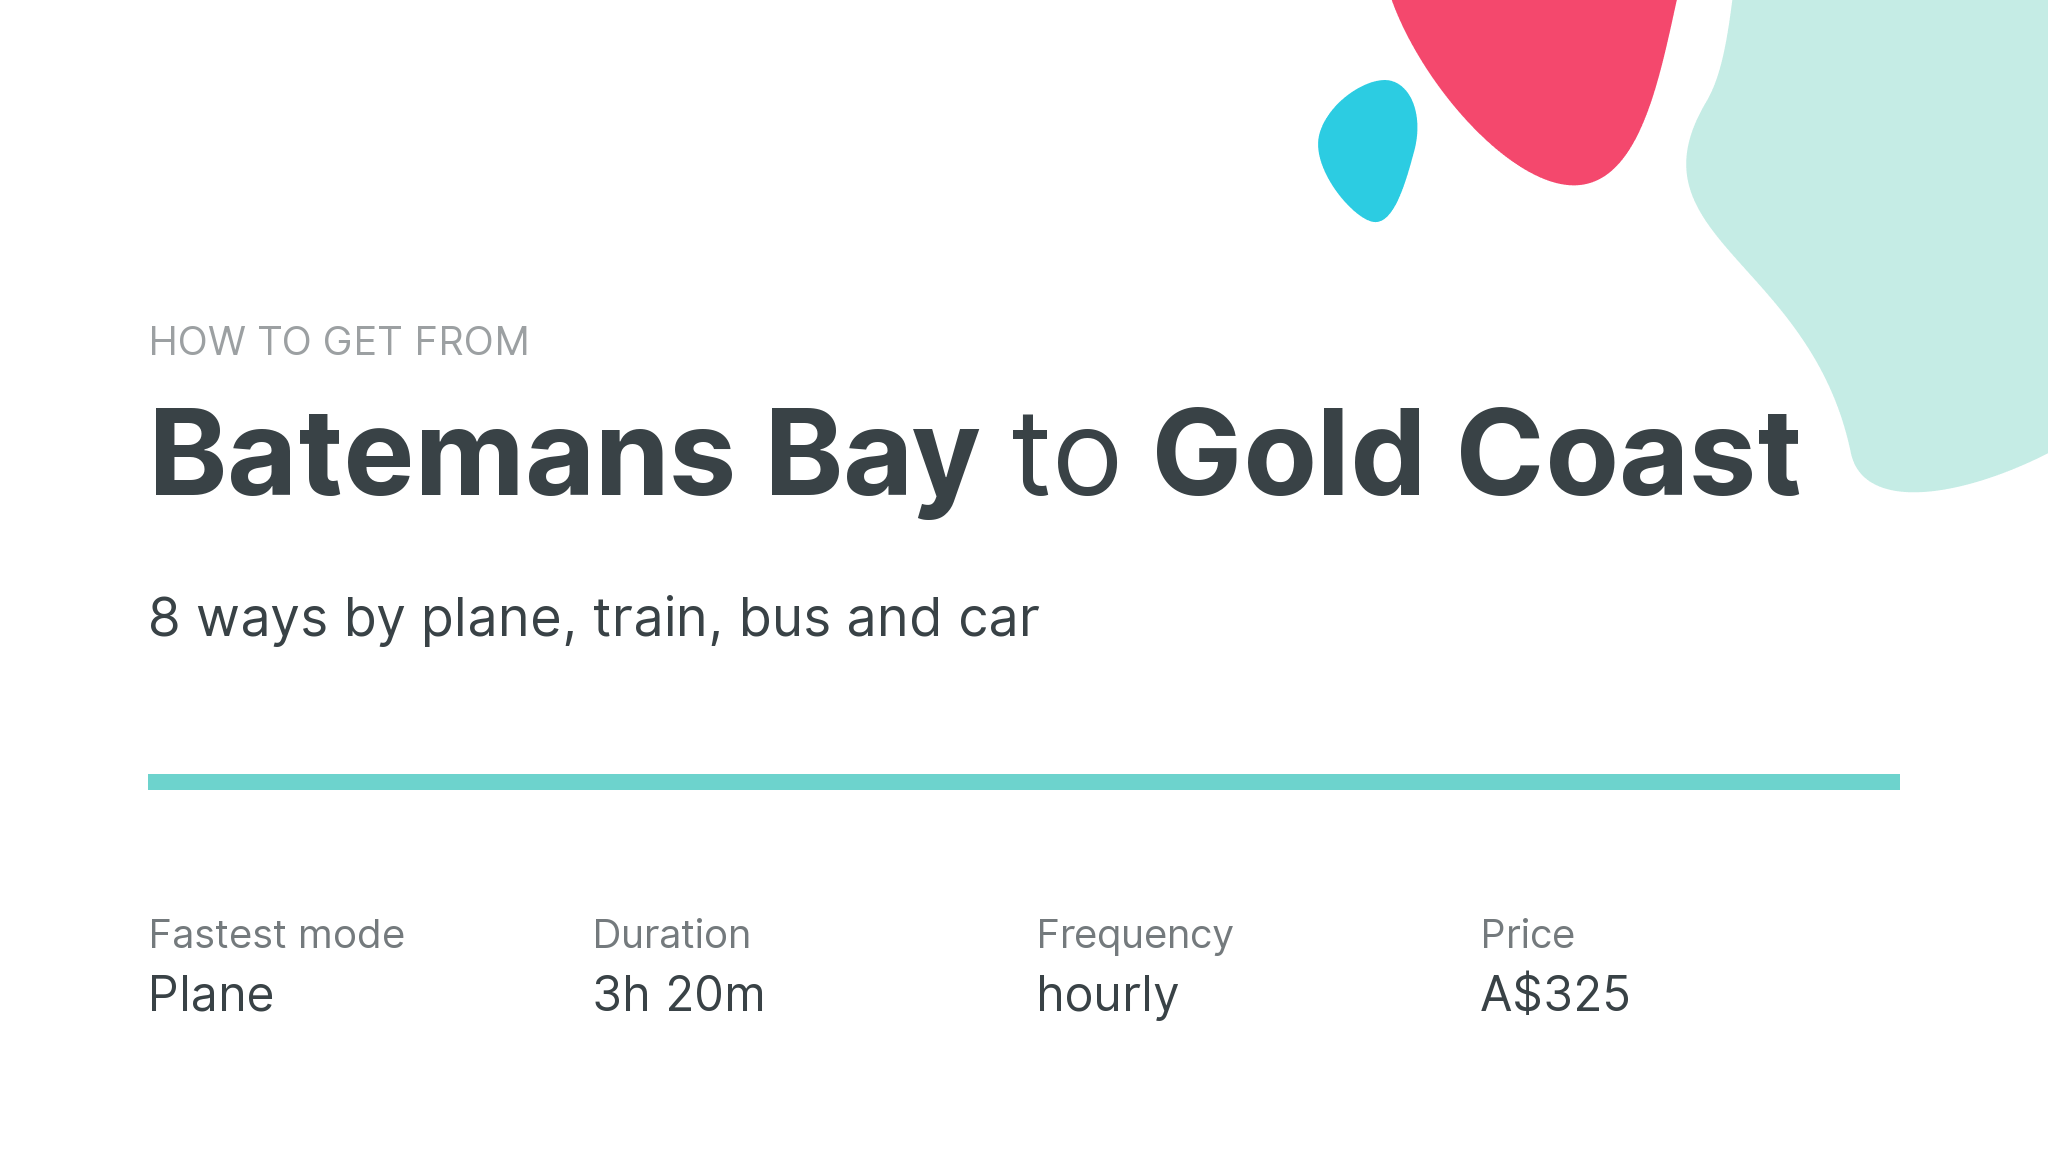 How do I get from Batemans Bay to Gold Coast